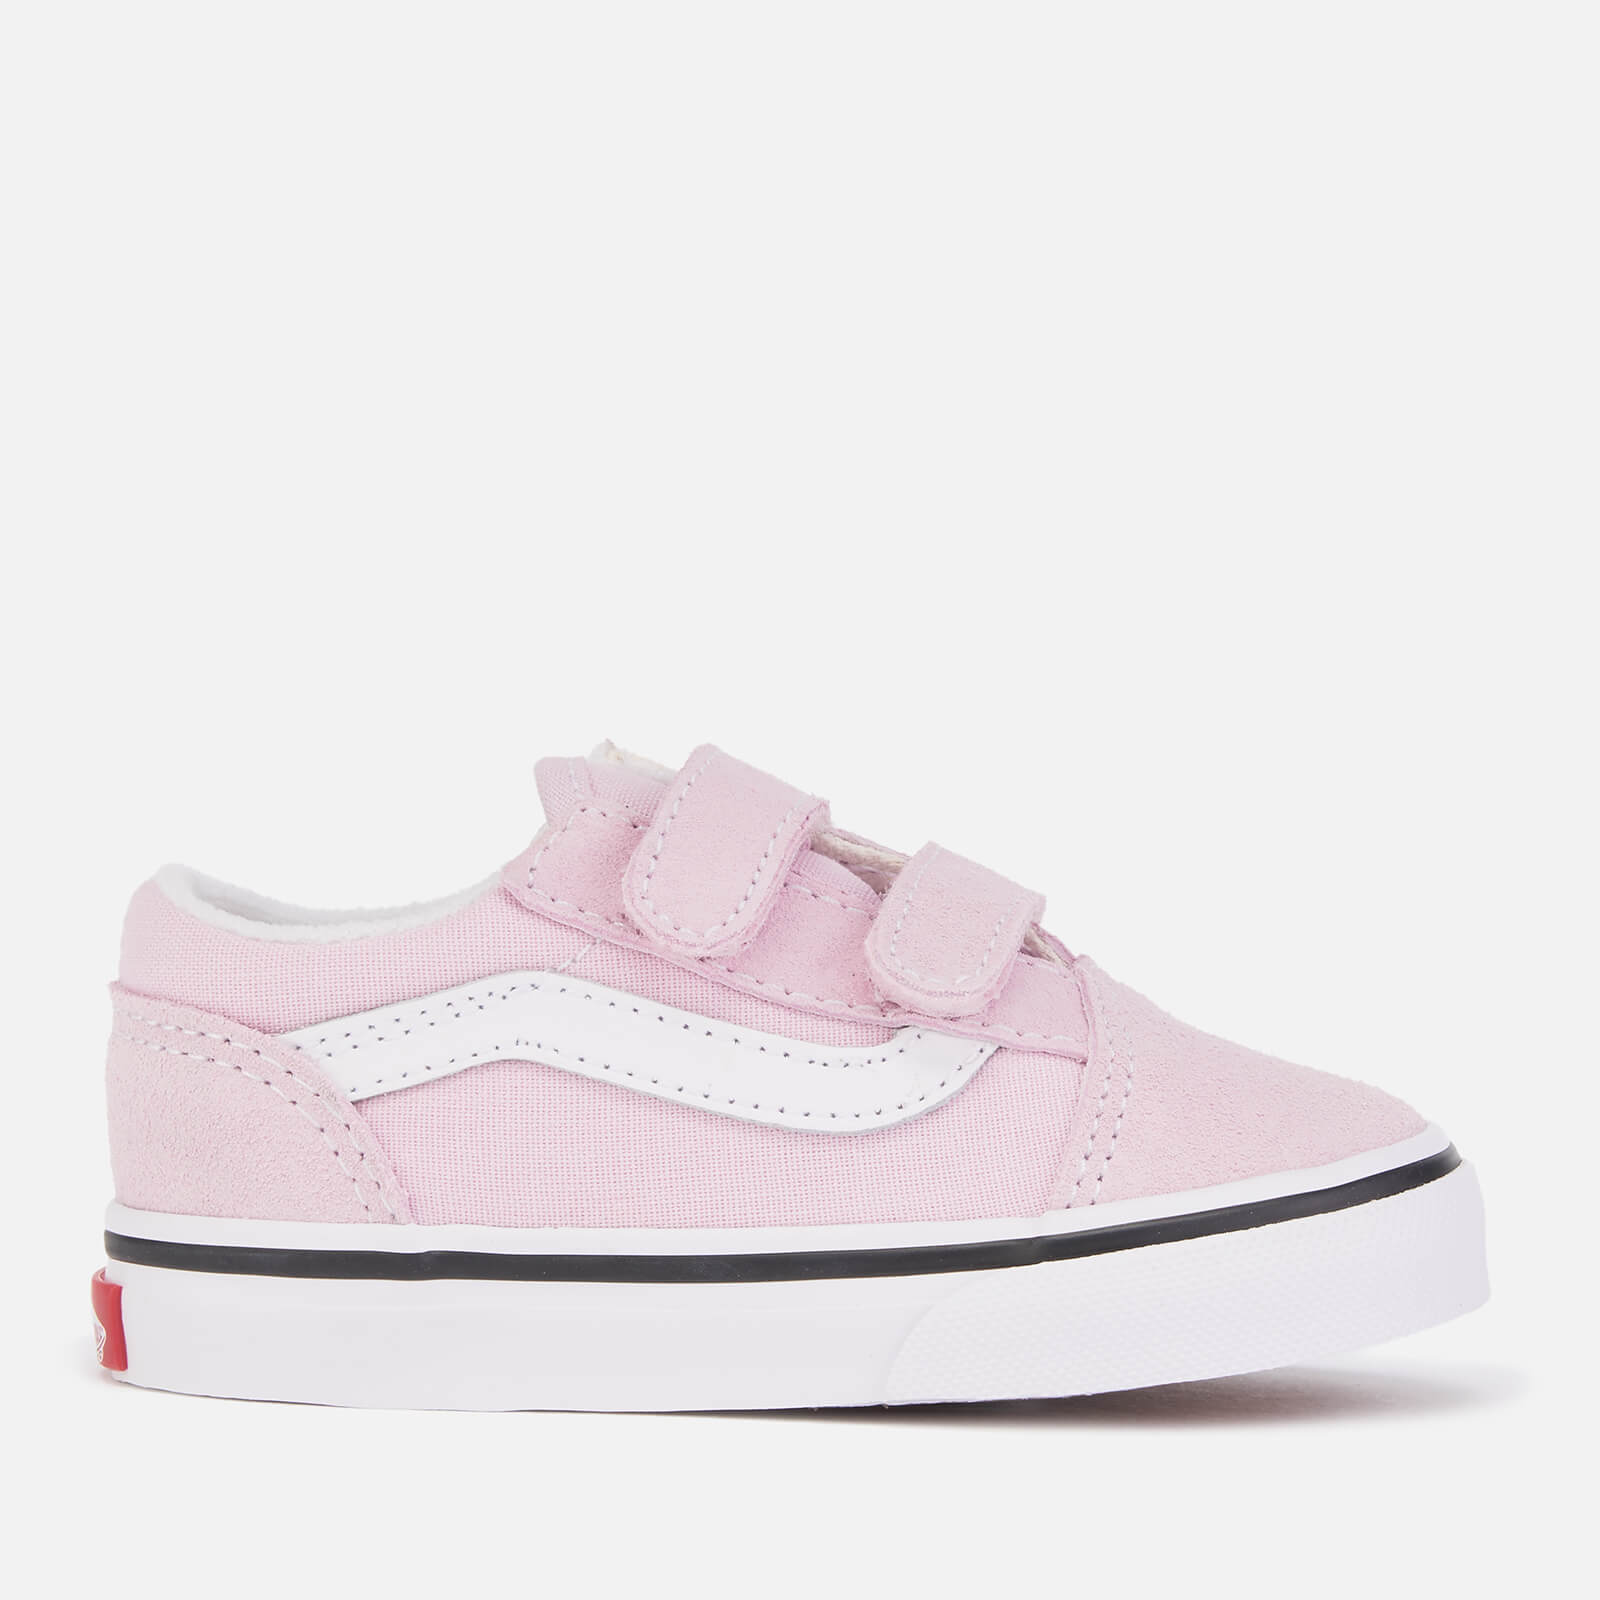 Vans Toddlers' Old Skool Velcro Trainers - Lilac Snow/True White - UK 2 Toddler